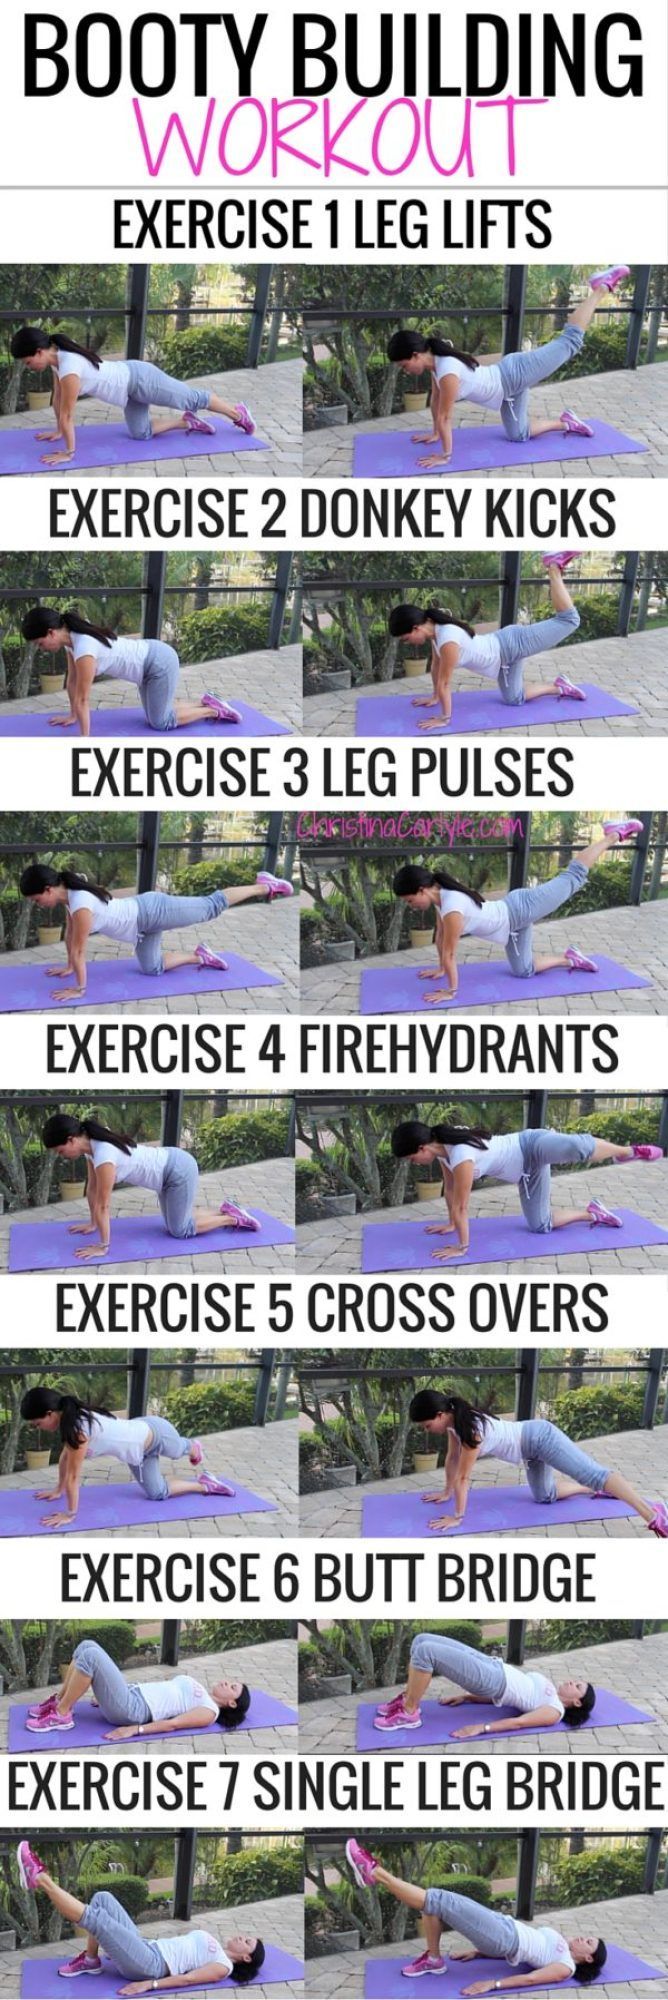 7 At Home Butt Workouts To Give You The Booty Of Your Dreams -   14 fitness Room exercise ideas